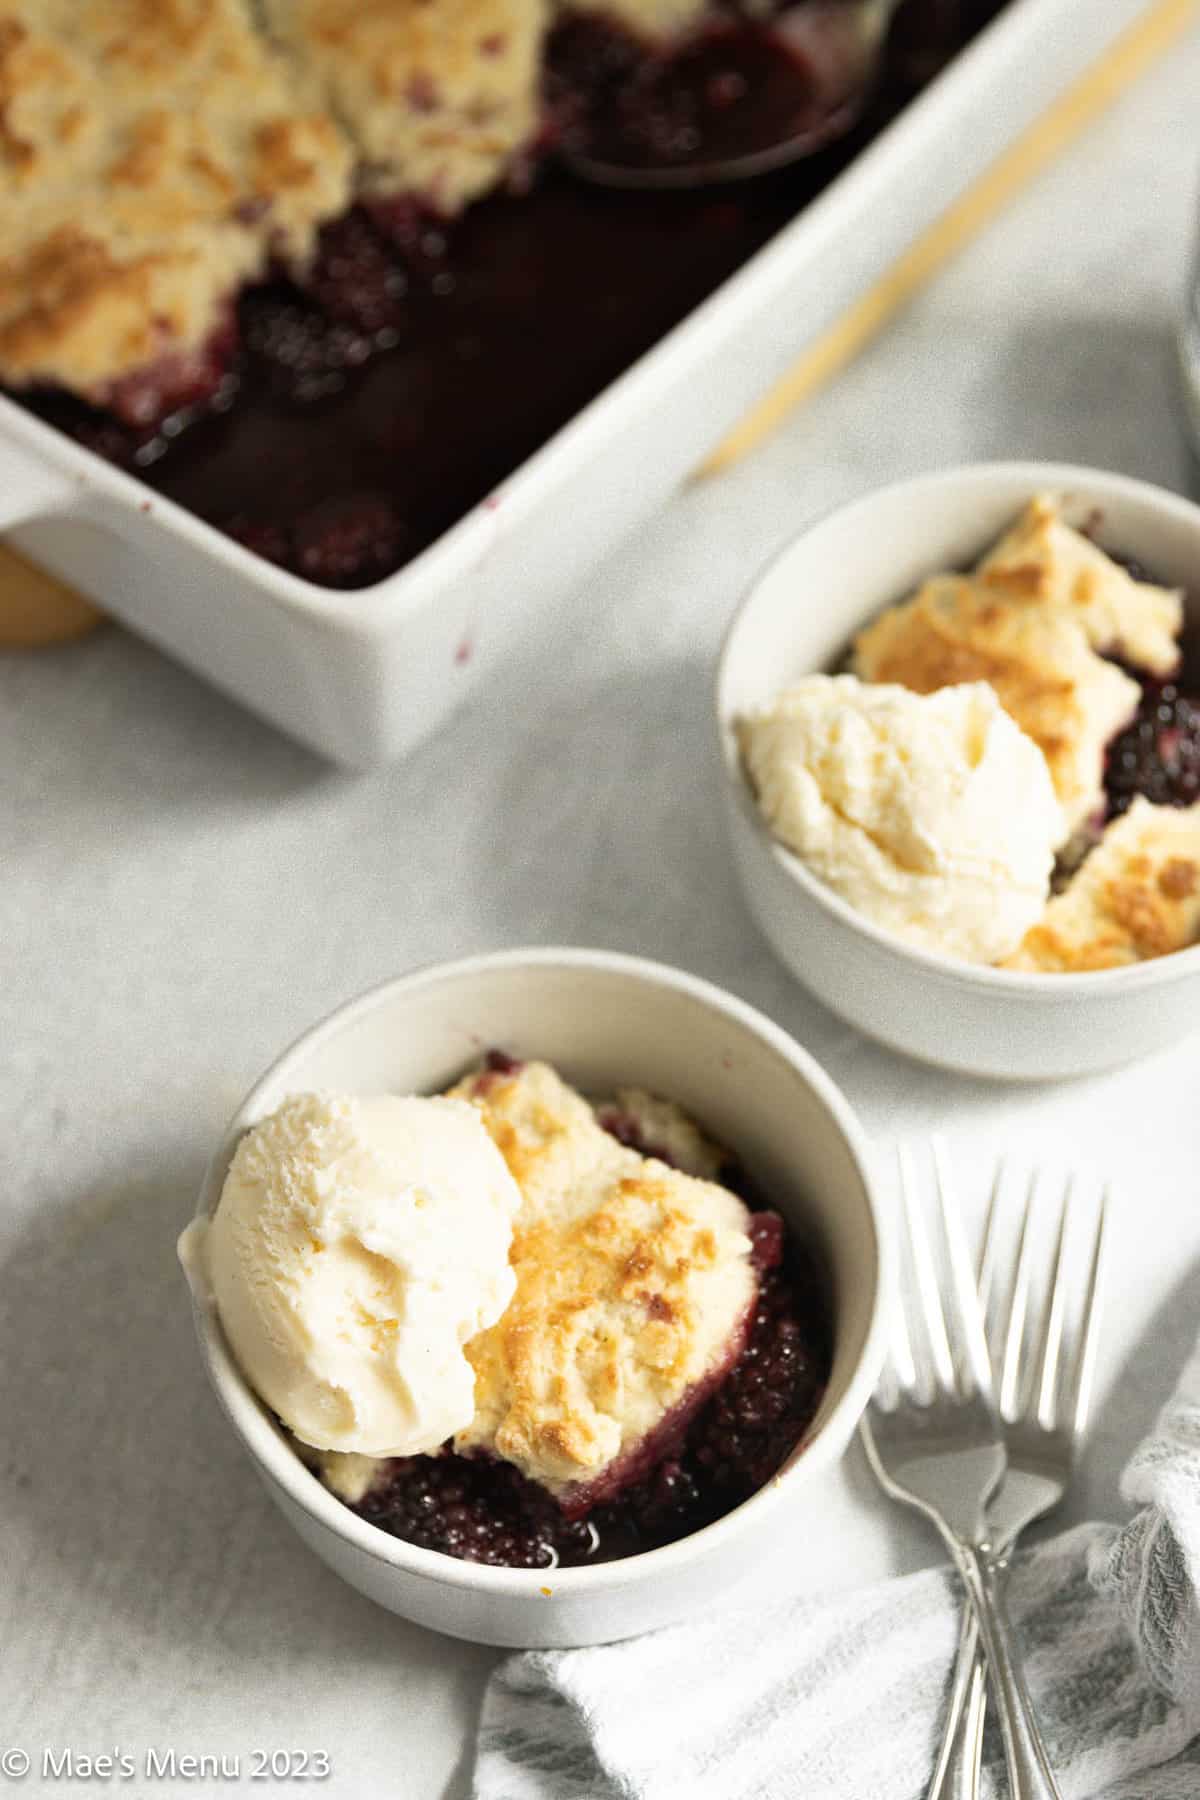 Two small dishes of gluten-free blackberry cobbler on the counter with forks.